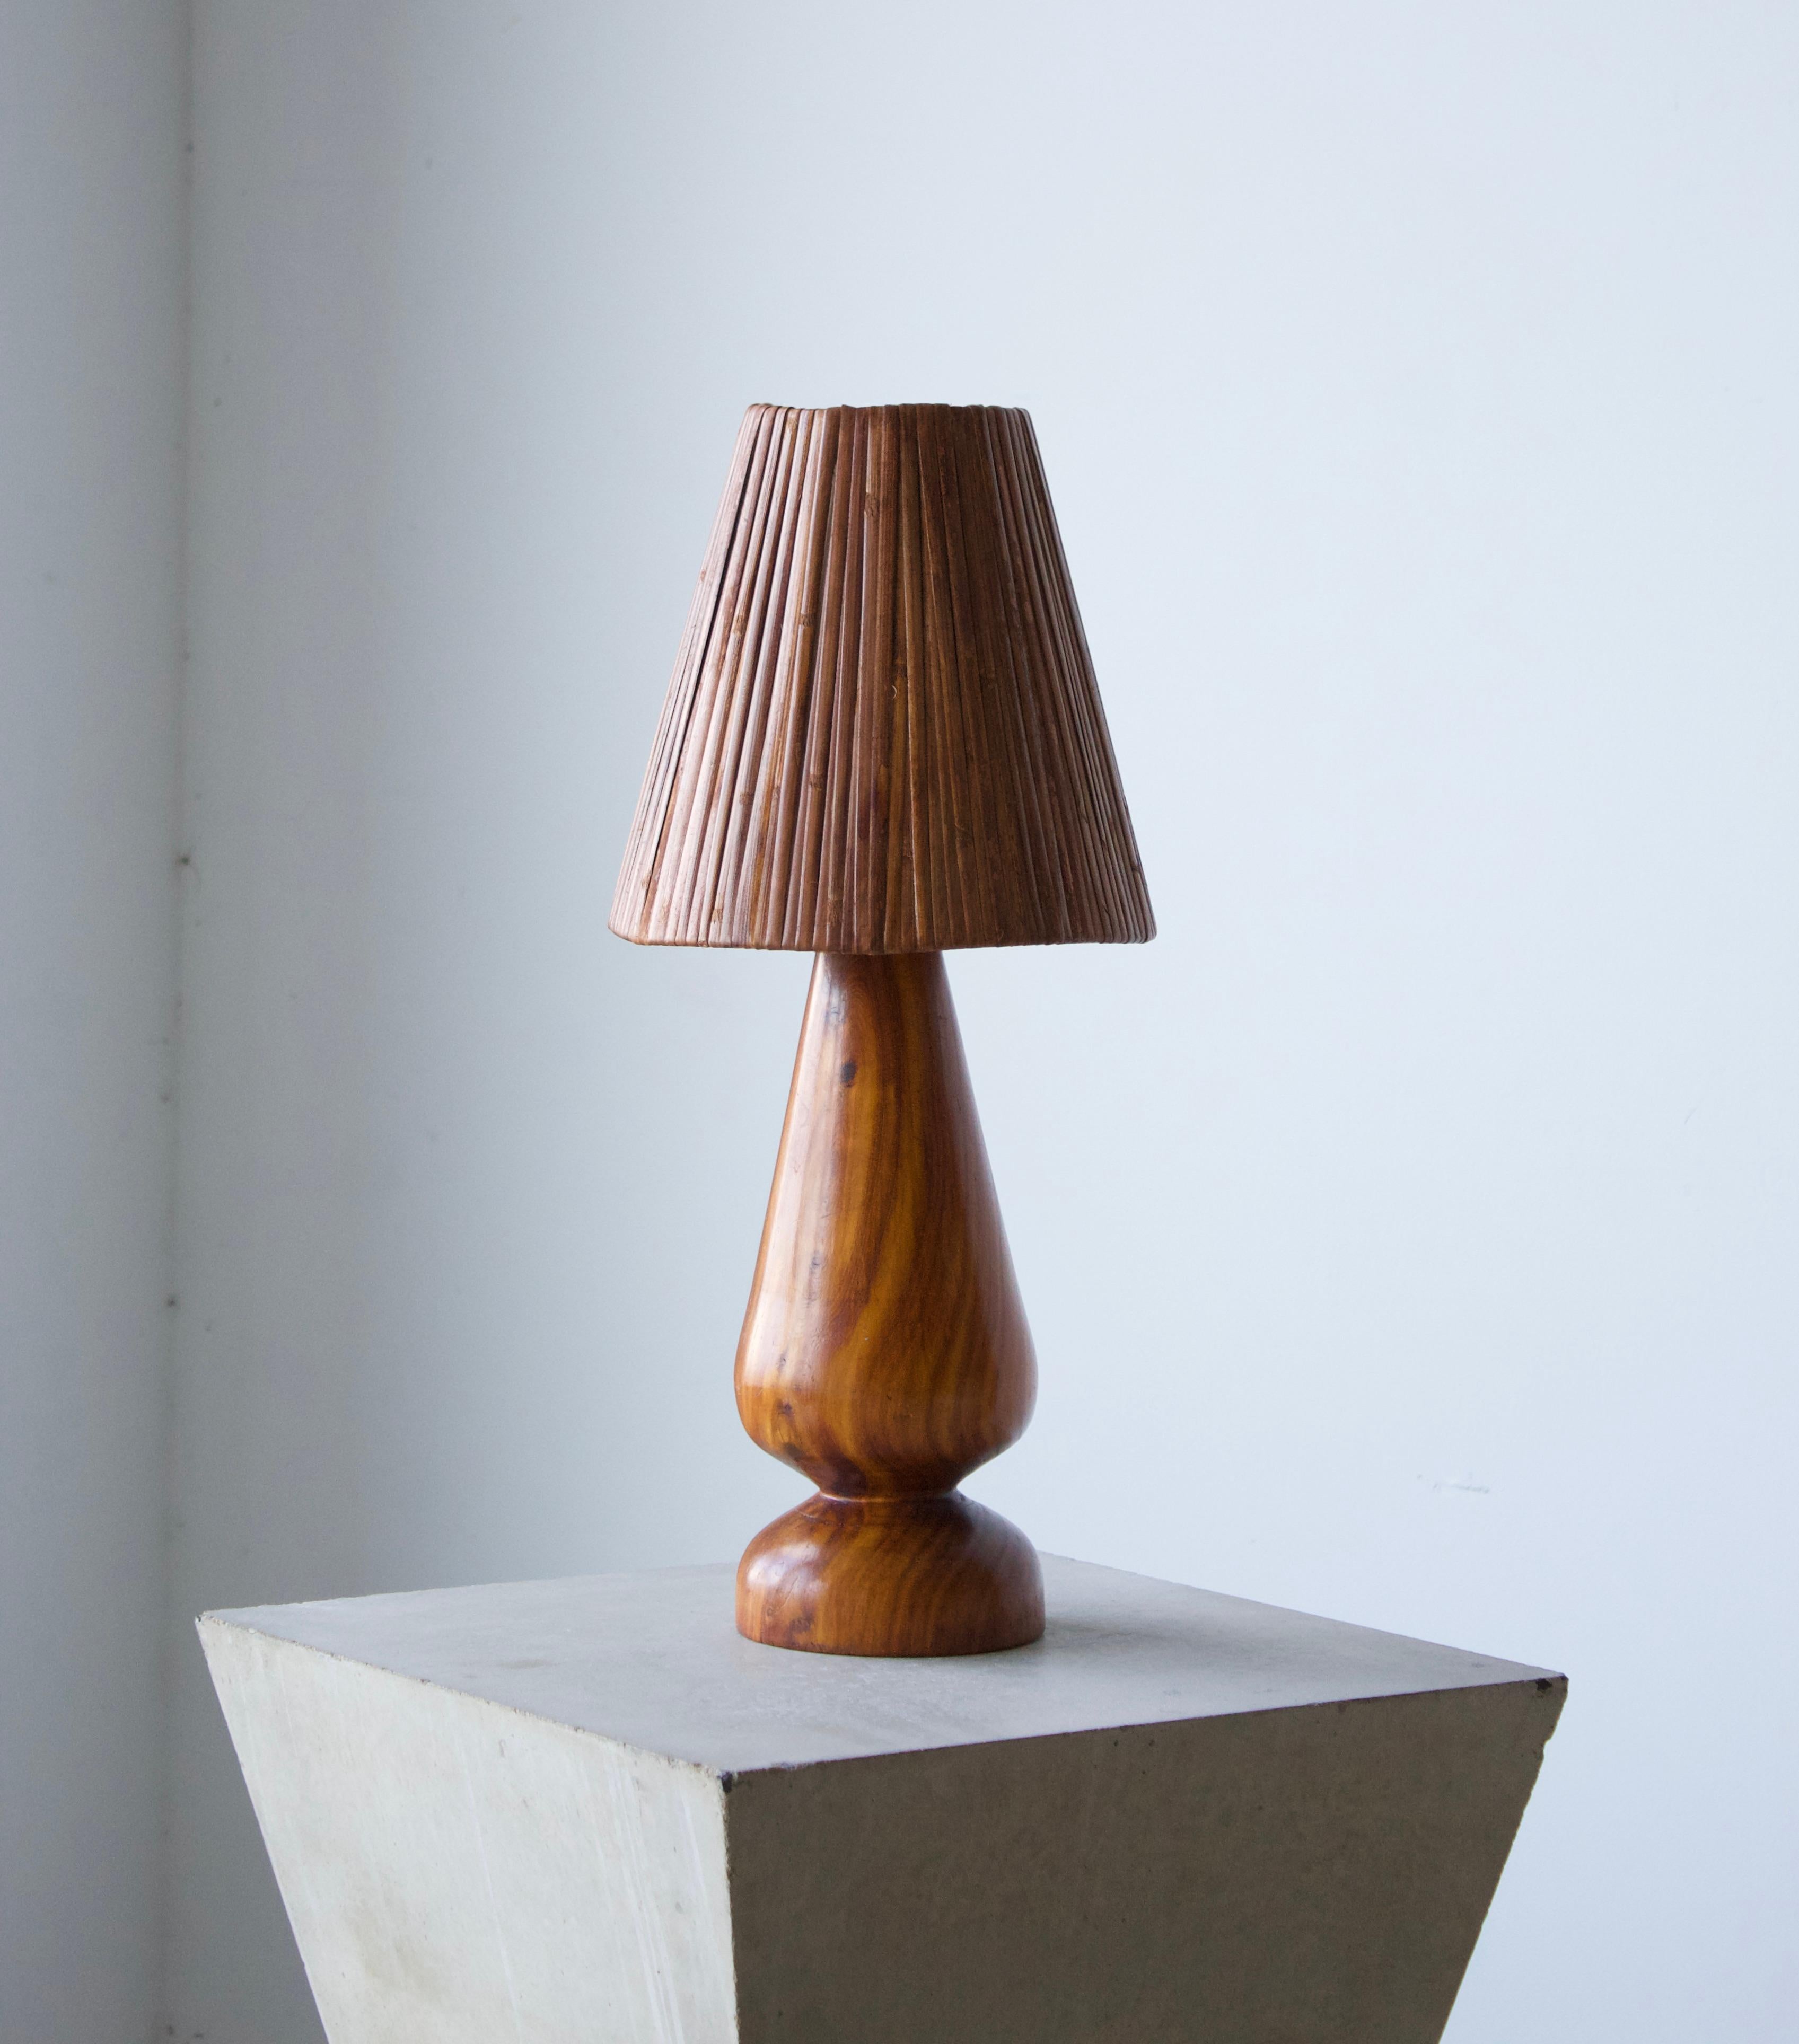 A sculptural handmade table lamp. Designed and produced in Brazil, c. 1960s. Features solid turned hardwood with beautiful dramatic grain. The base is paired with a vintage rattan lampshade. Each with superb original patina. 

Other designers of